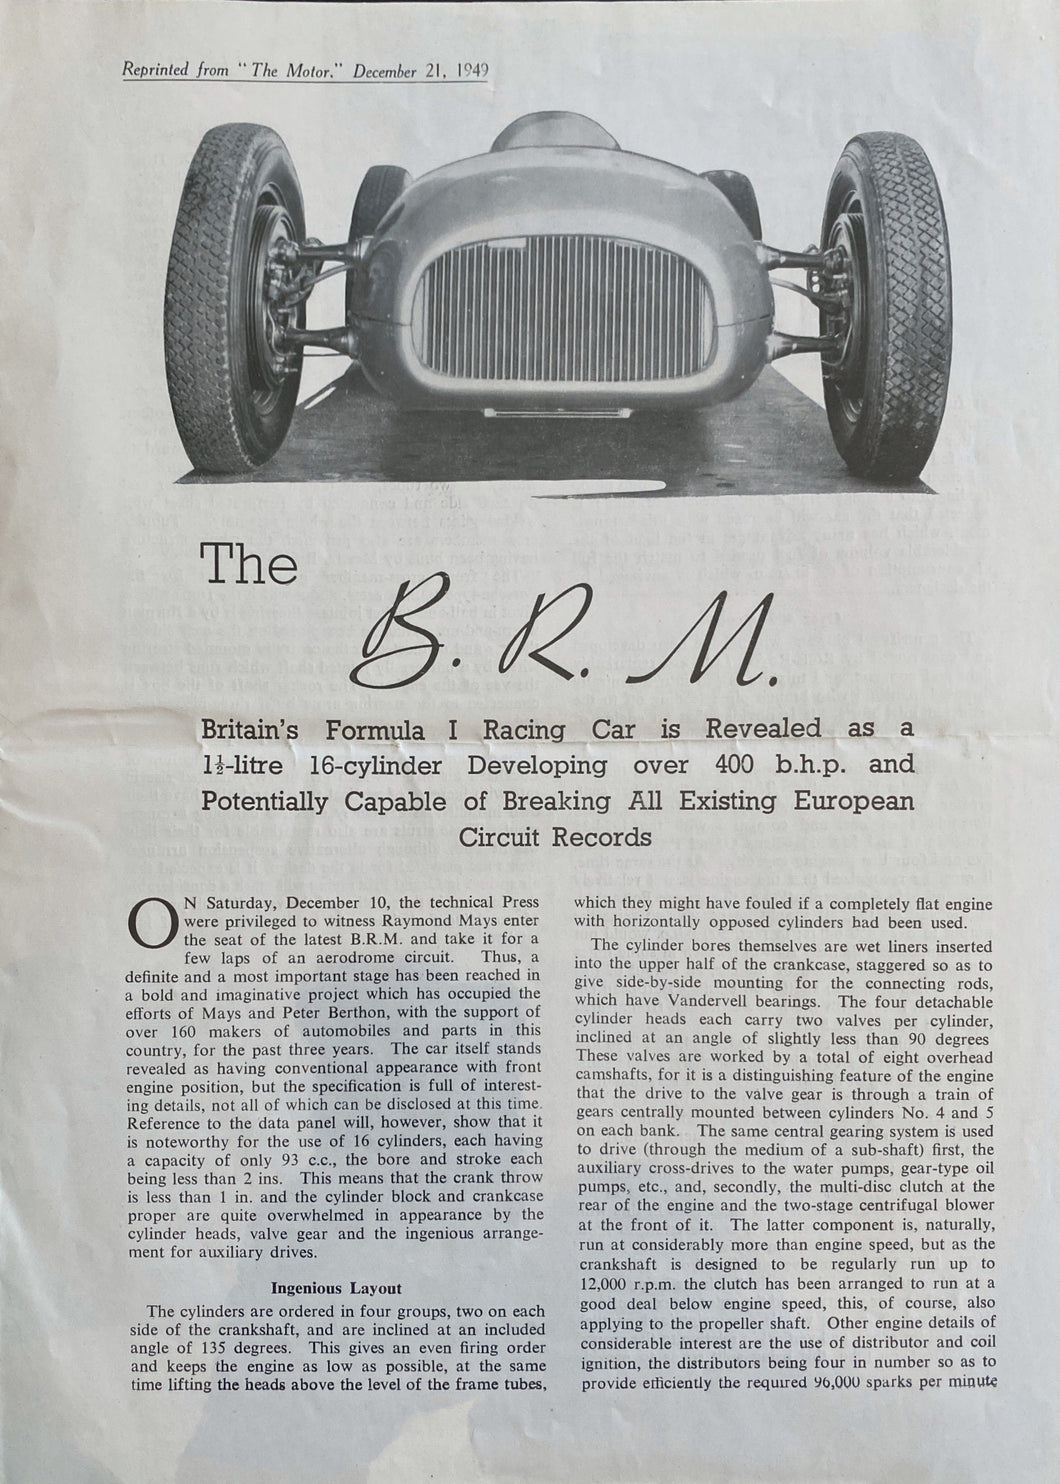 BRM - Reprint of article on Mk1